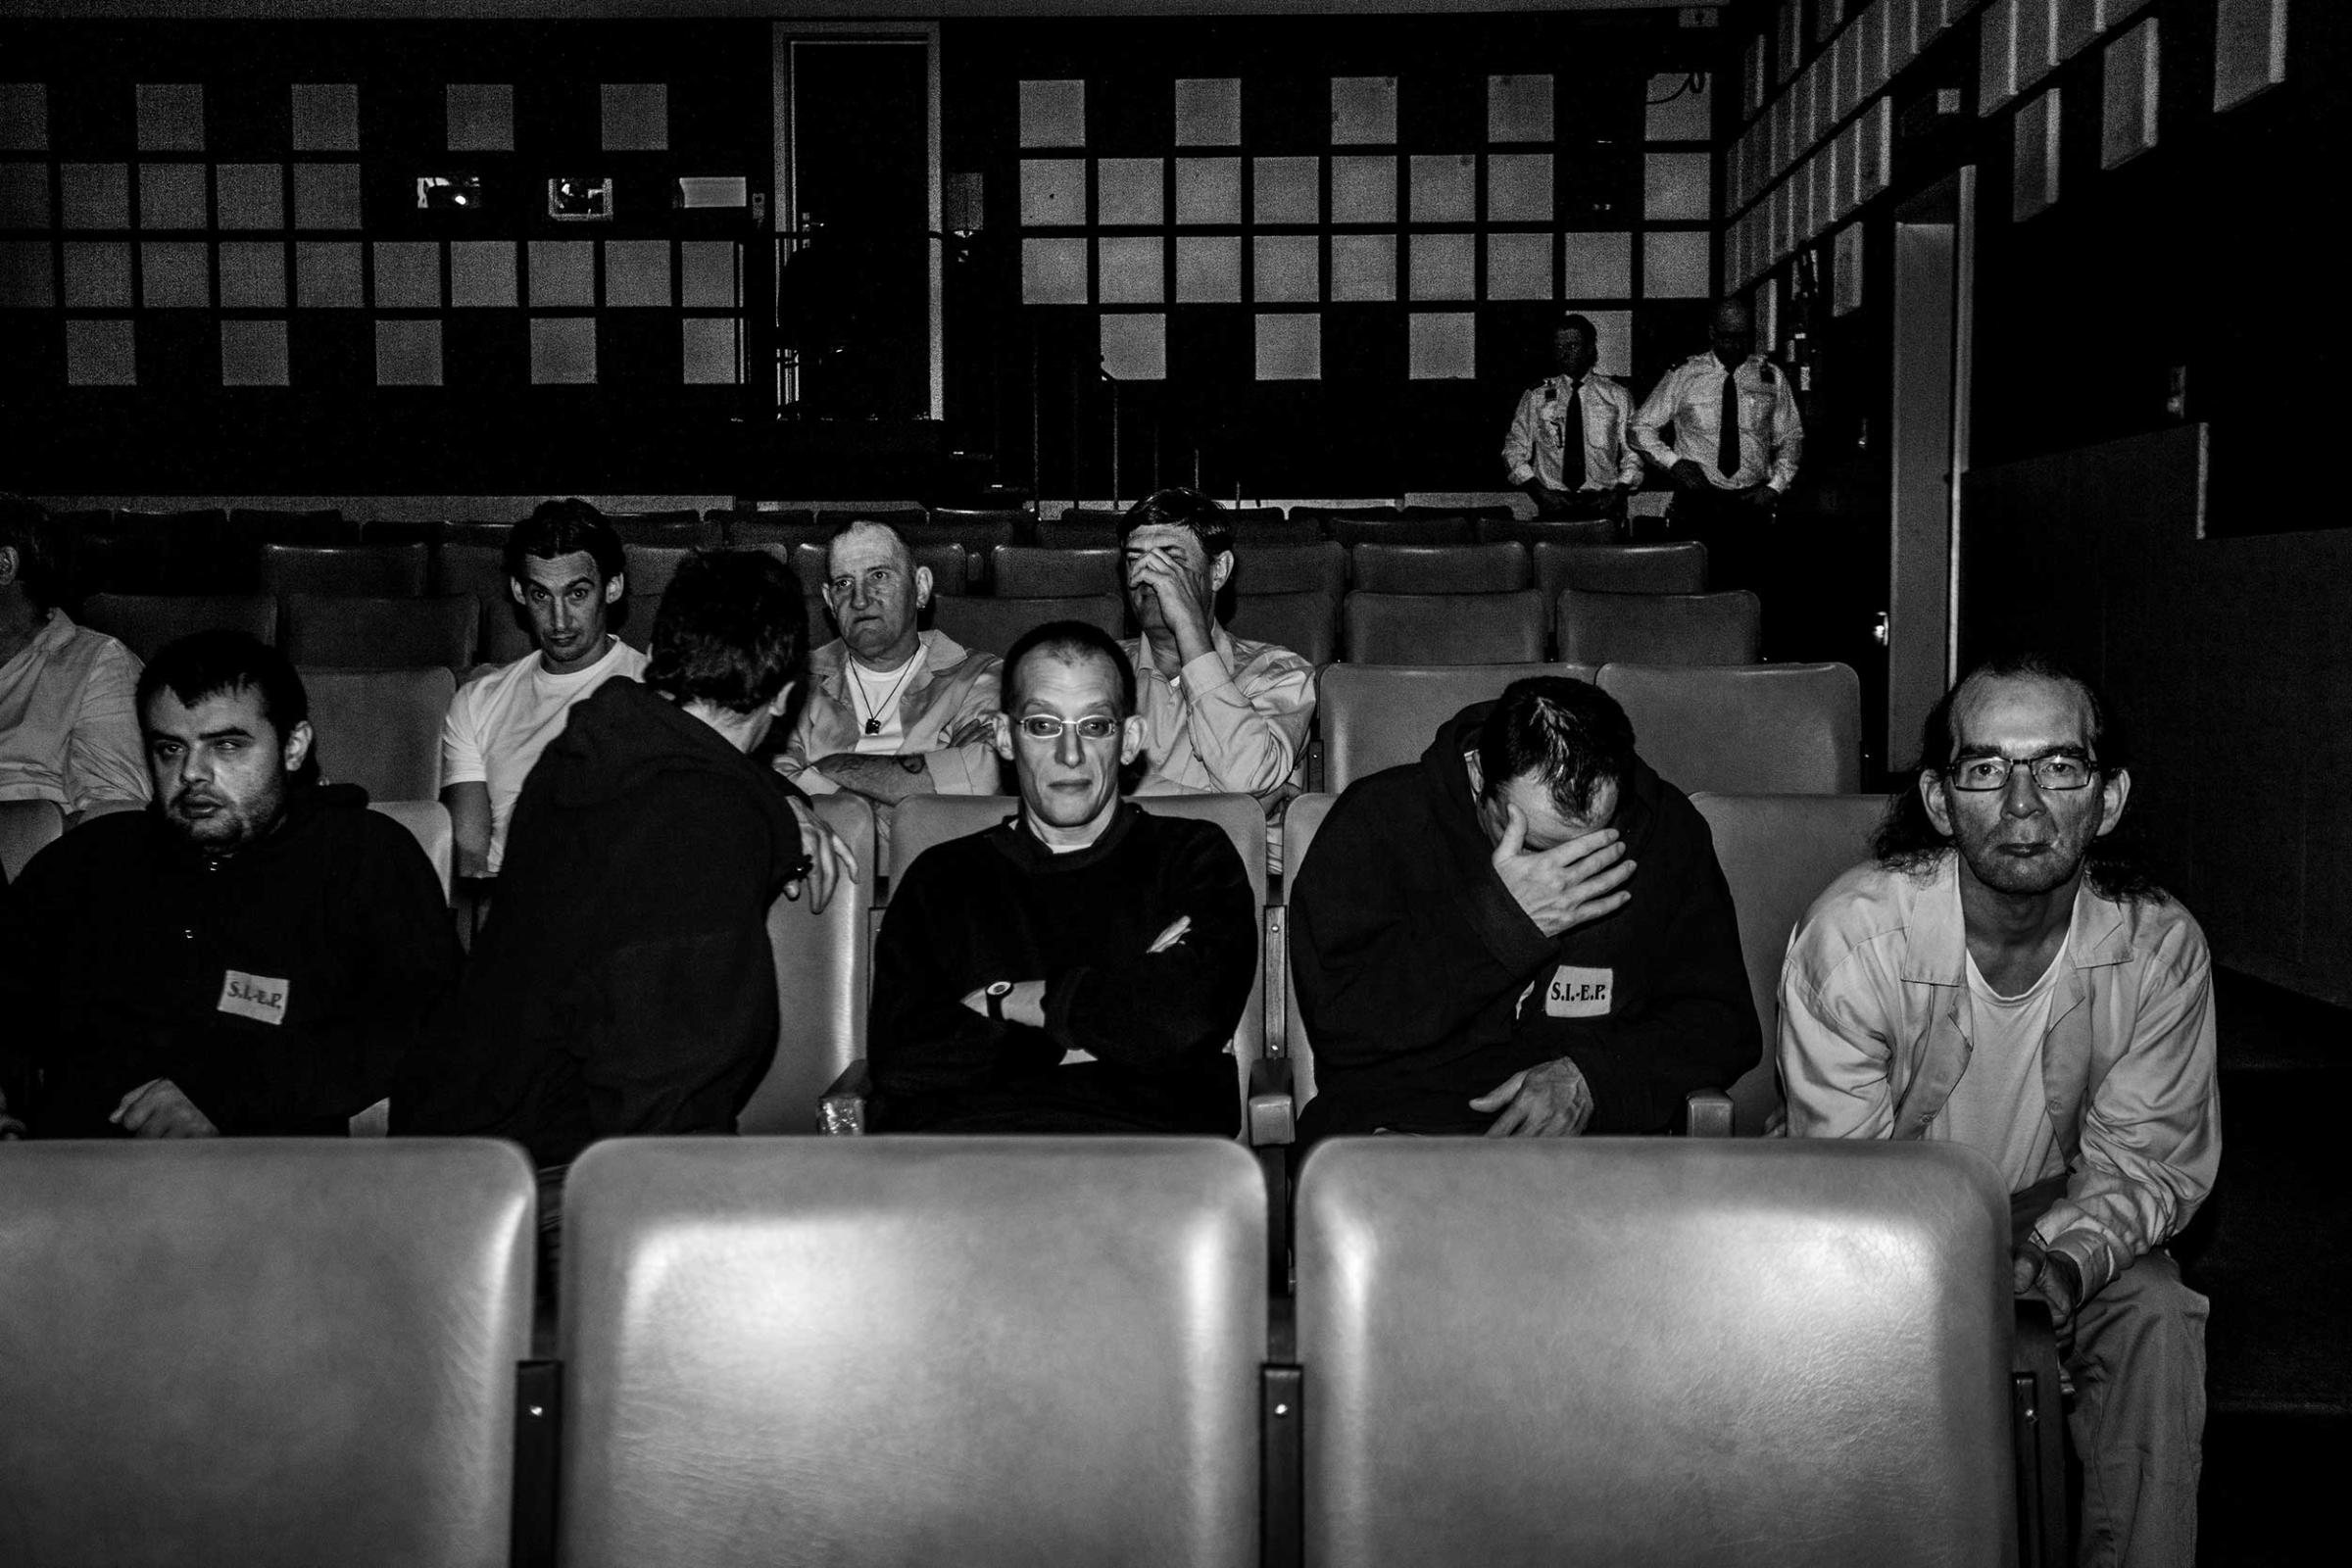 Inmates watching a film inside the movie theater of their prison in Ghent, Belgium. March 2014.